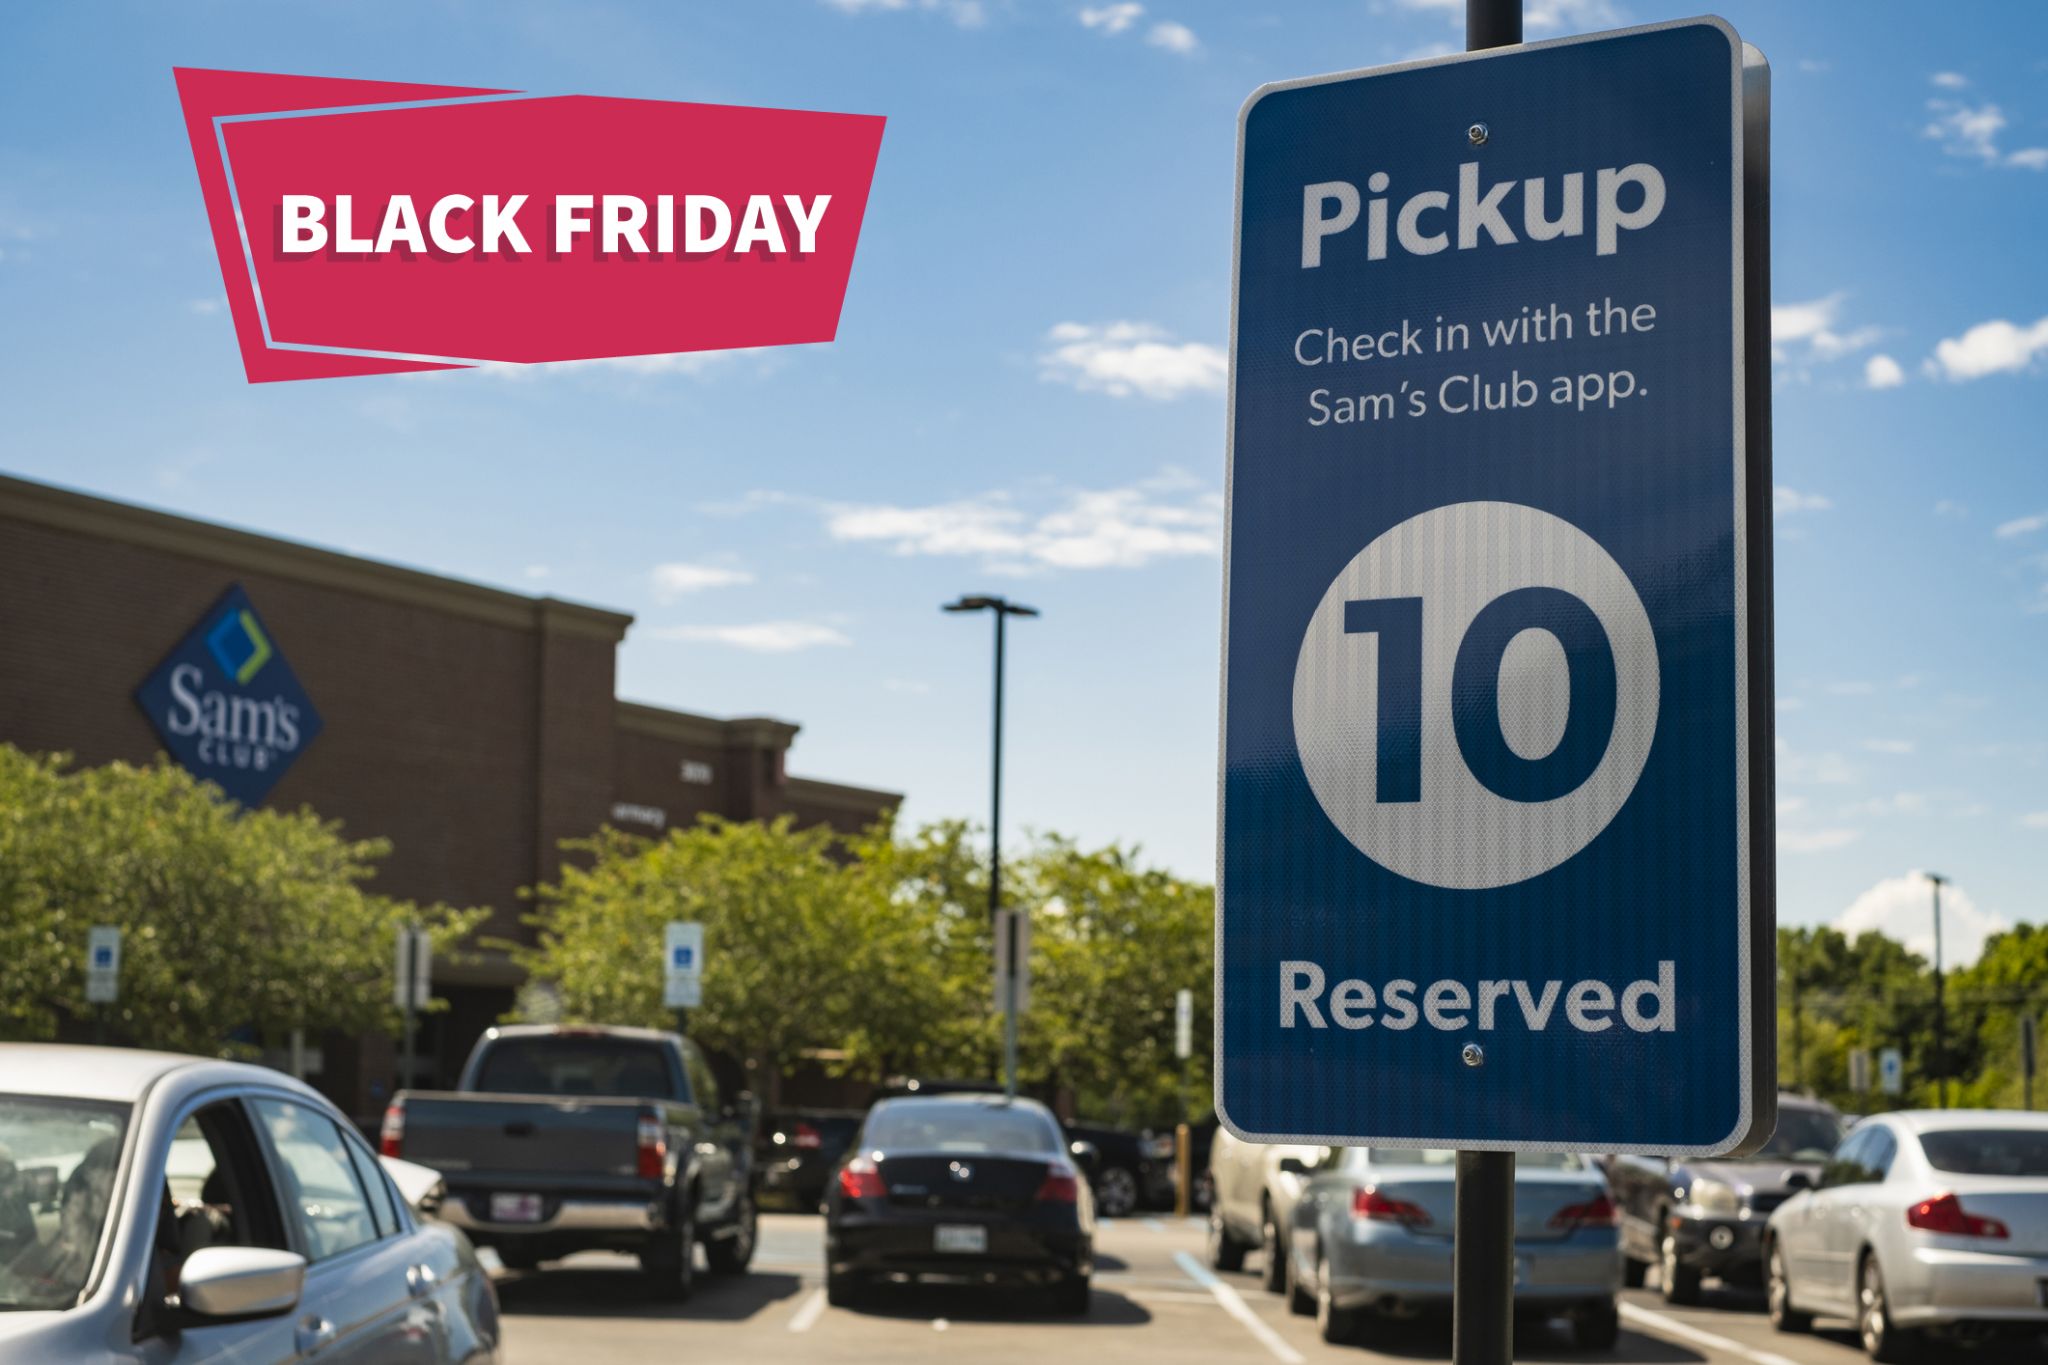 Skip the lines and get these amazing Black Friday deals at Sam's Club with  their free Pickup service